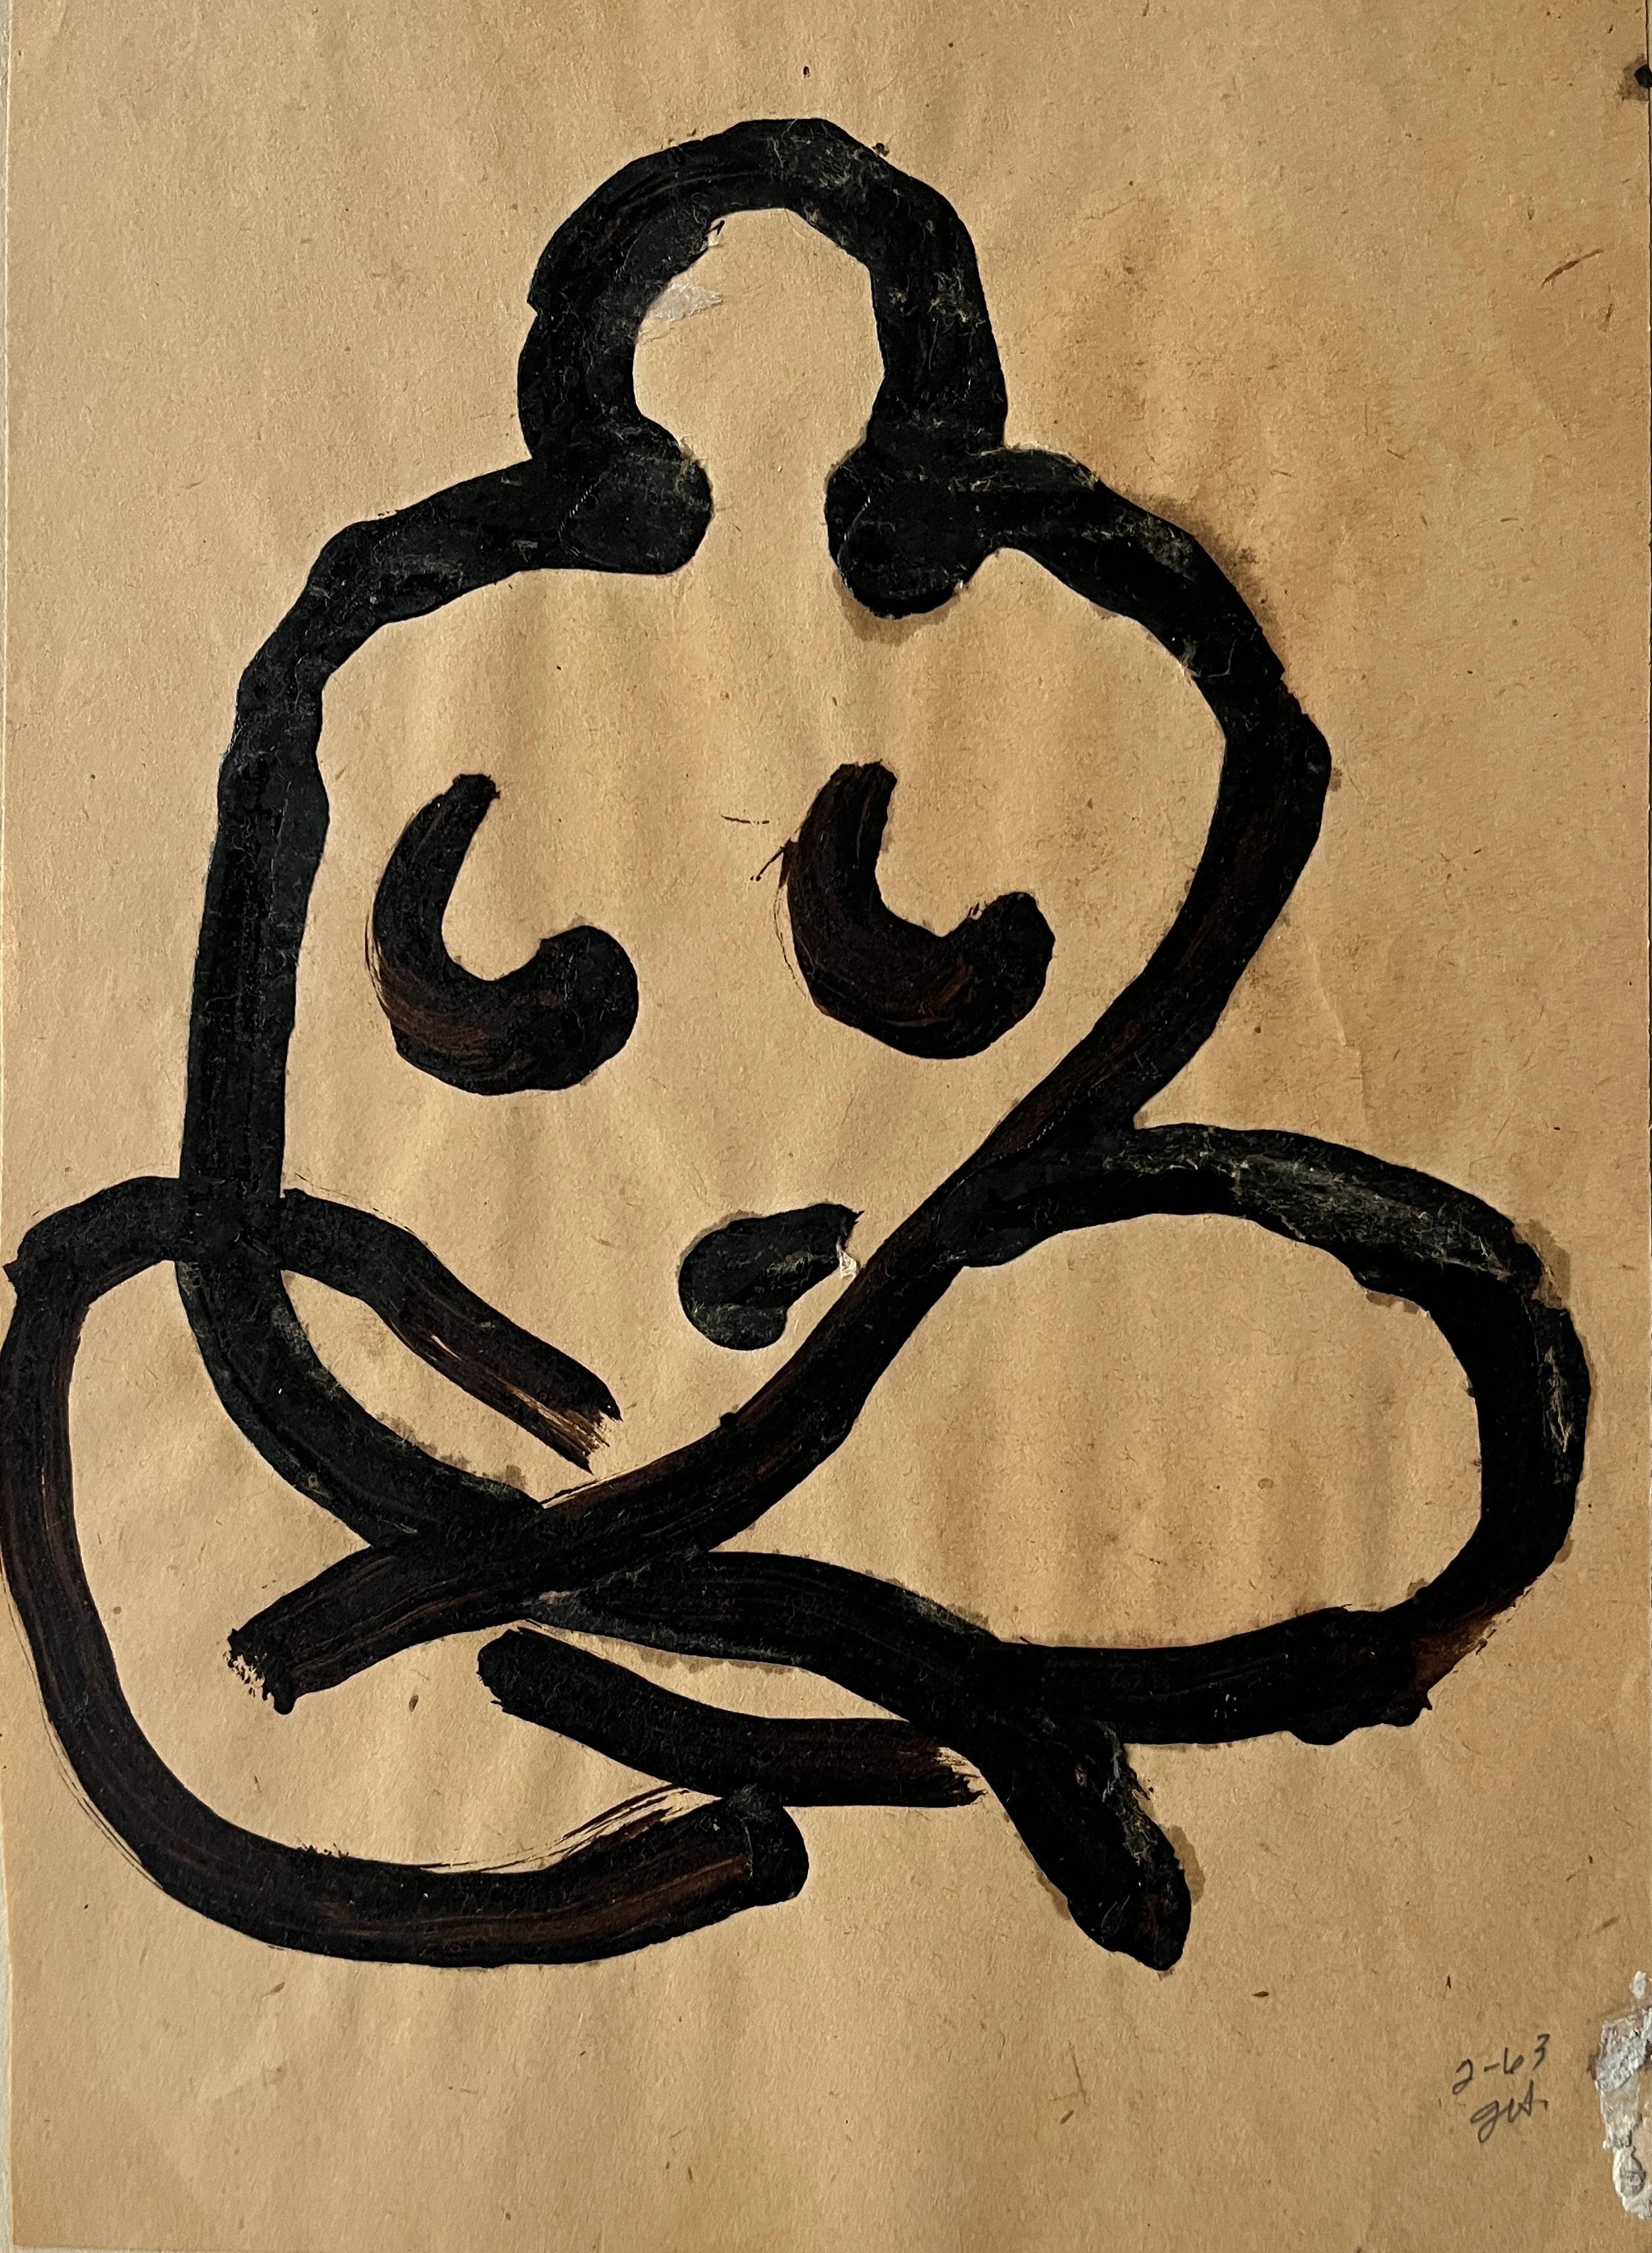 Jack Hooper
"Simple Nude"
February 1963
Gouache on paper
6.5"x9.25" unframed
Signed and dated in pencil lower right

In a captivating work on brown paper with the stark simplicity of black gouache, Jack Hooper's artistry shines through. This piece,